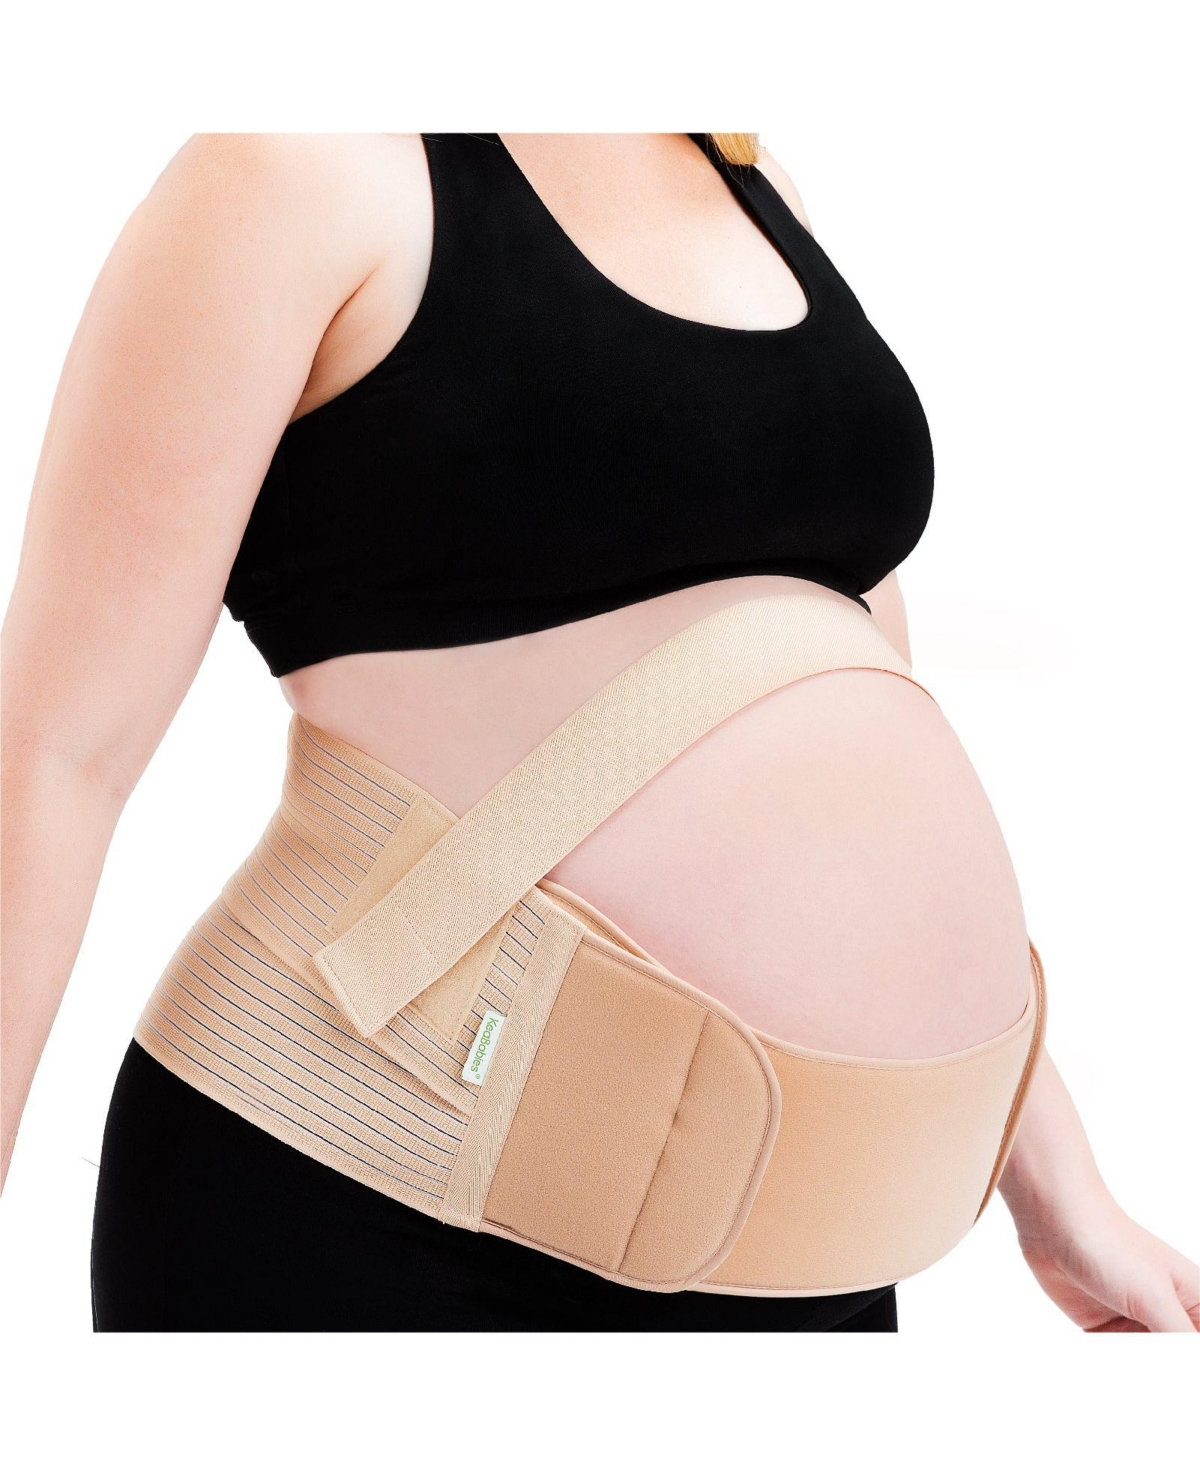 Keababies 2 In 1 Pregnancy Belly Support Band, Maternity Belt, Pregnancy Must Haves Baby Belly Bands In Classic Ivory